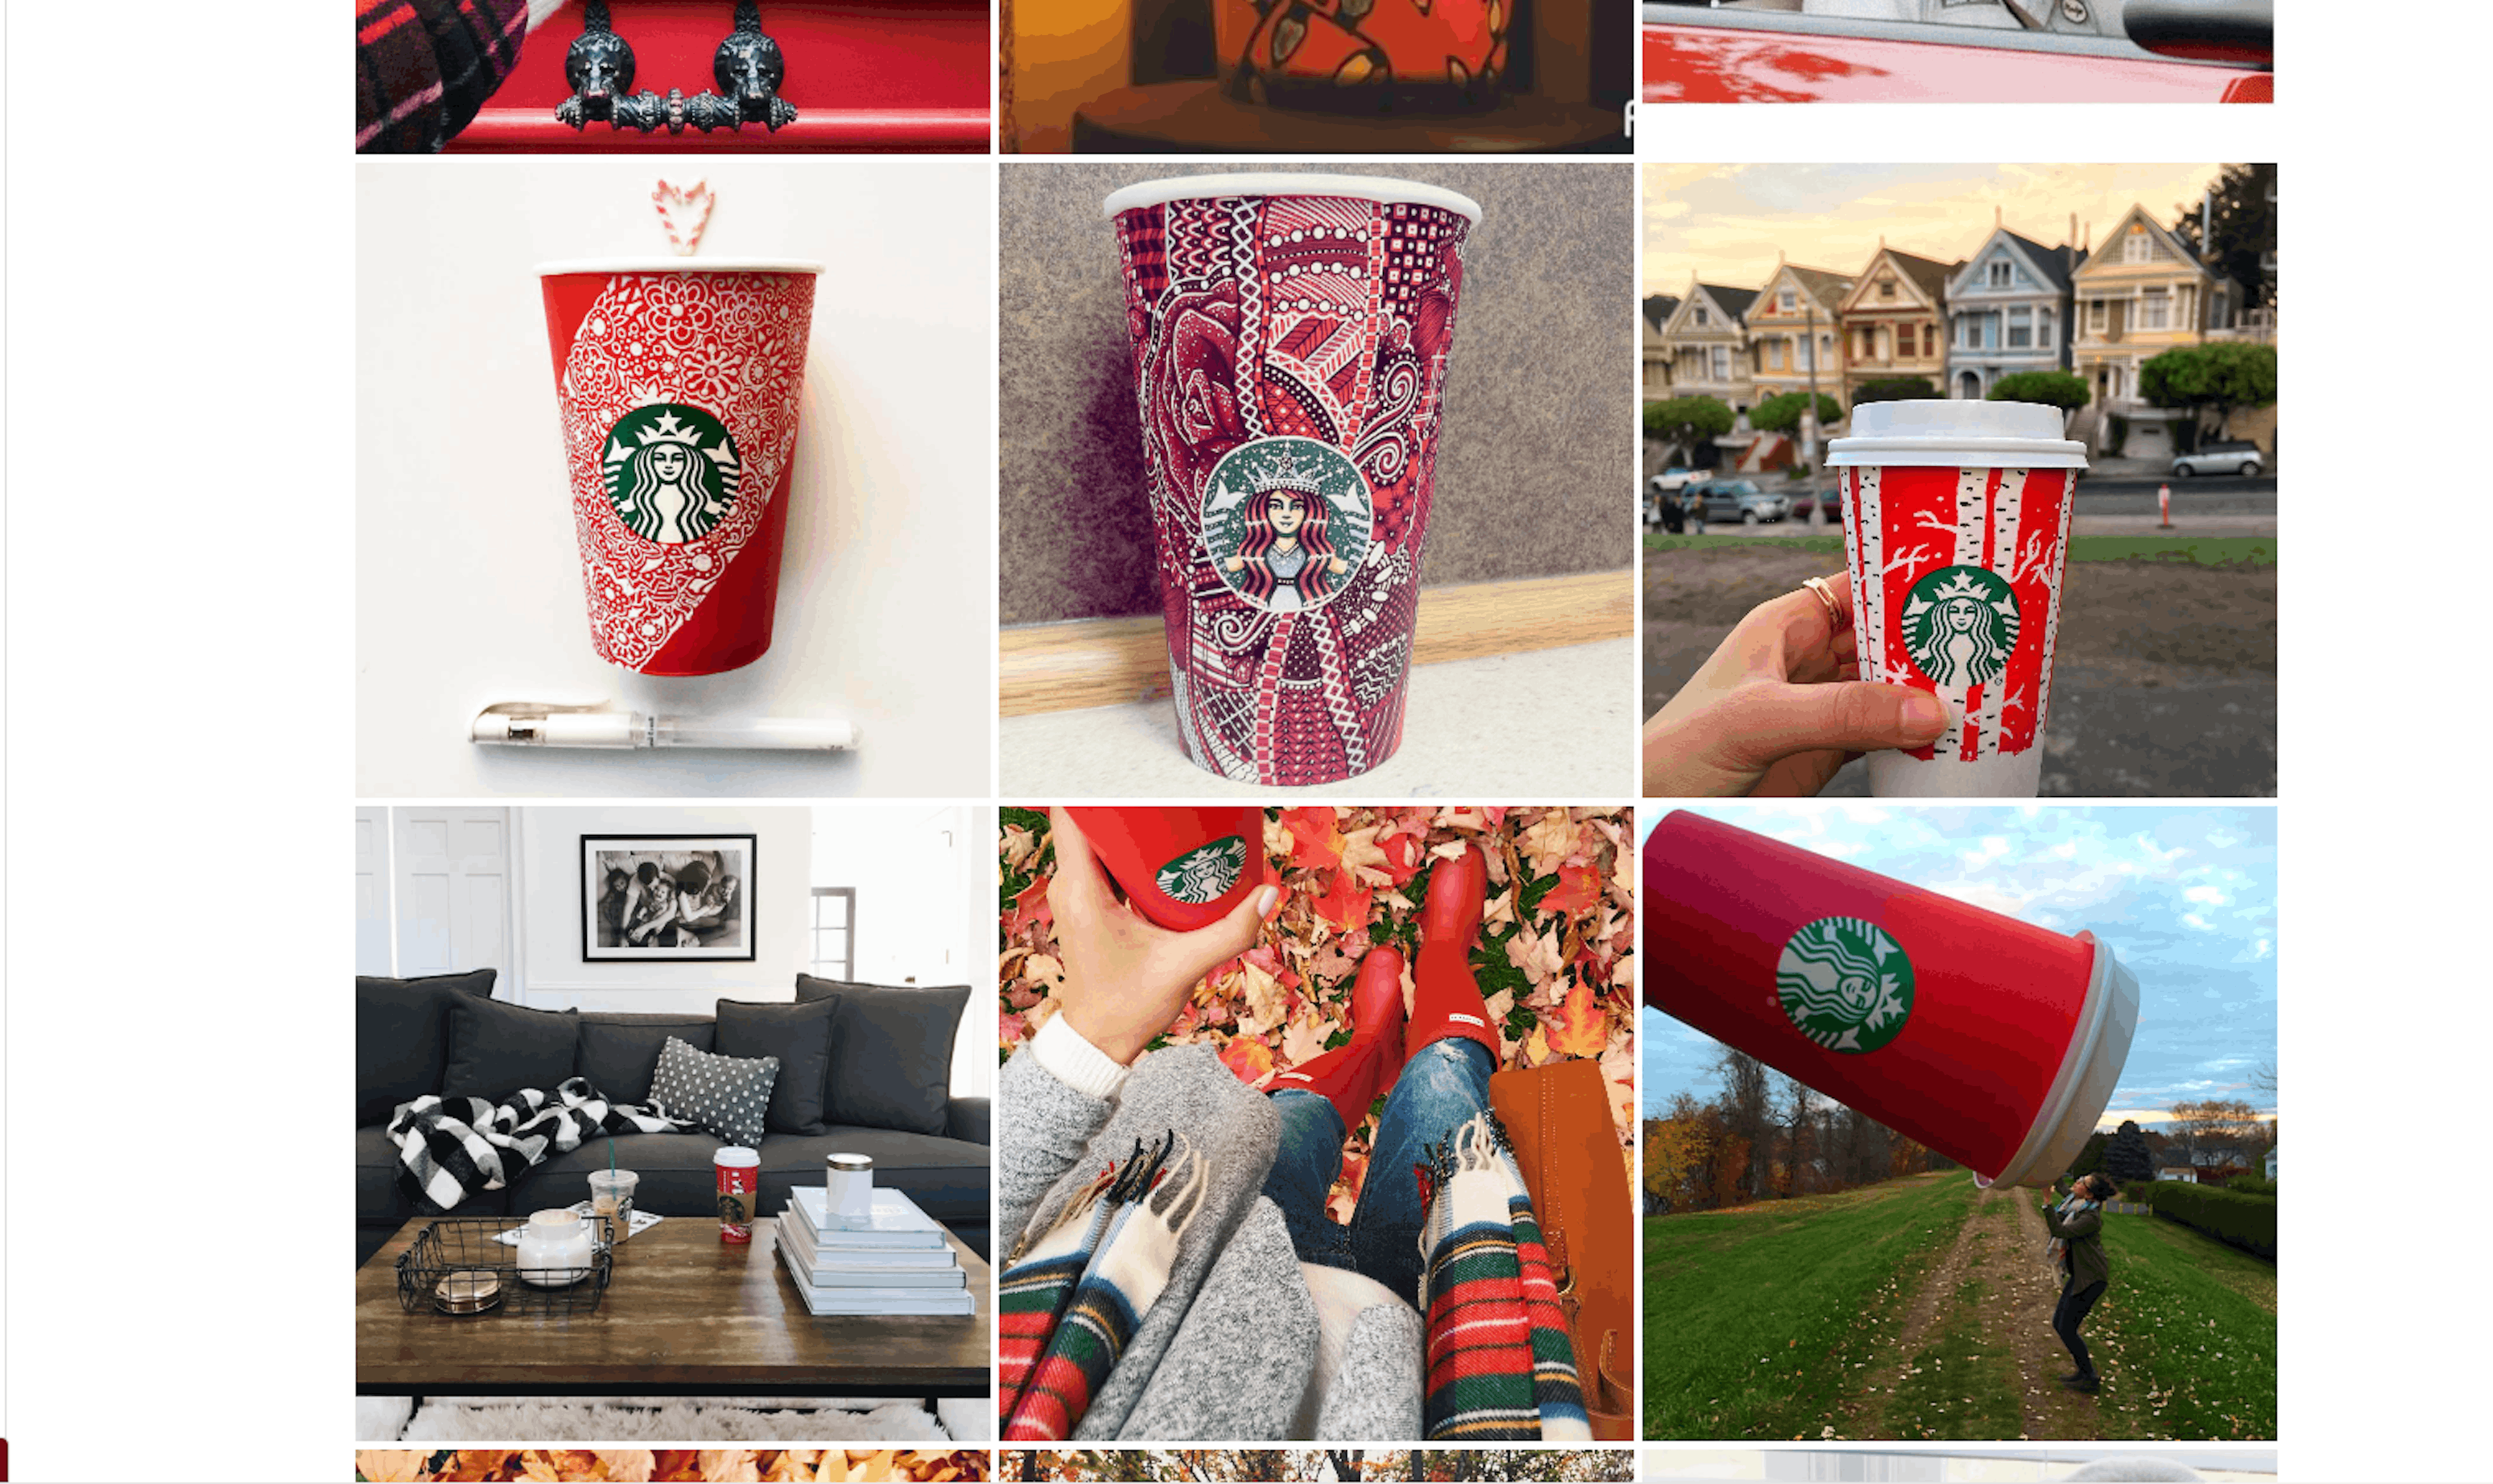 Starbucks cups in the "RedCupContest" hashtags.